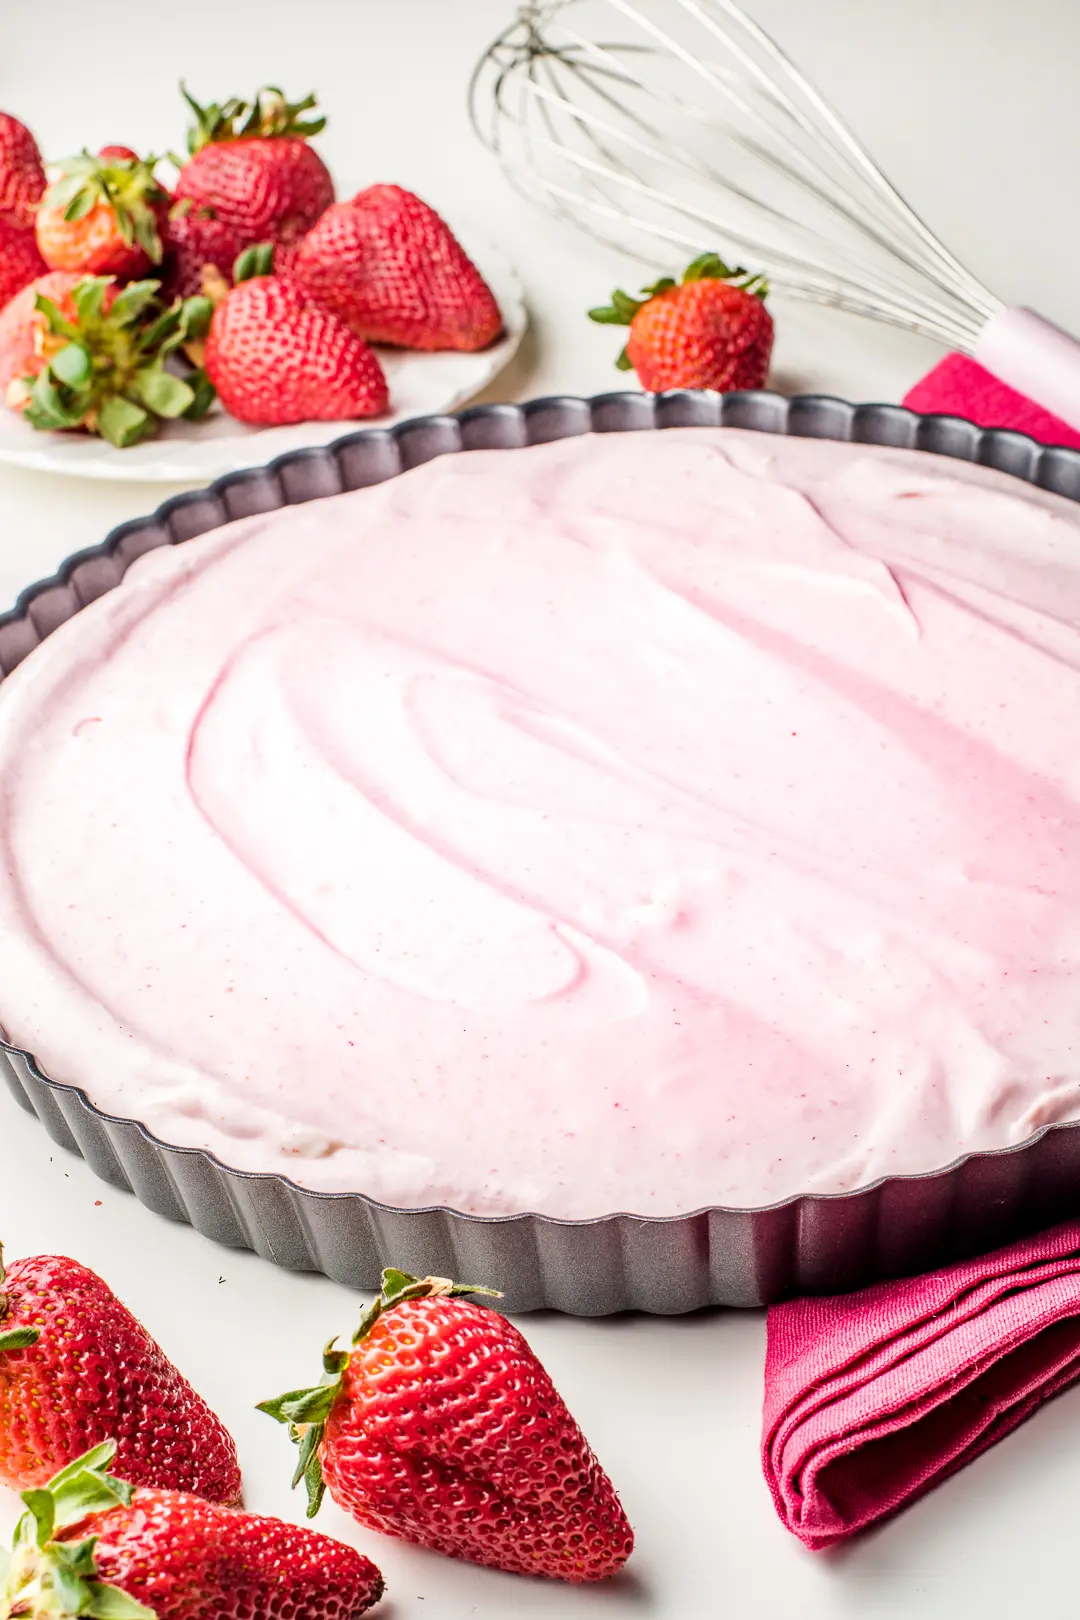 Strawberry cream pie filling inside of a tart pan surrounded by fresh strawberries